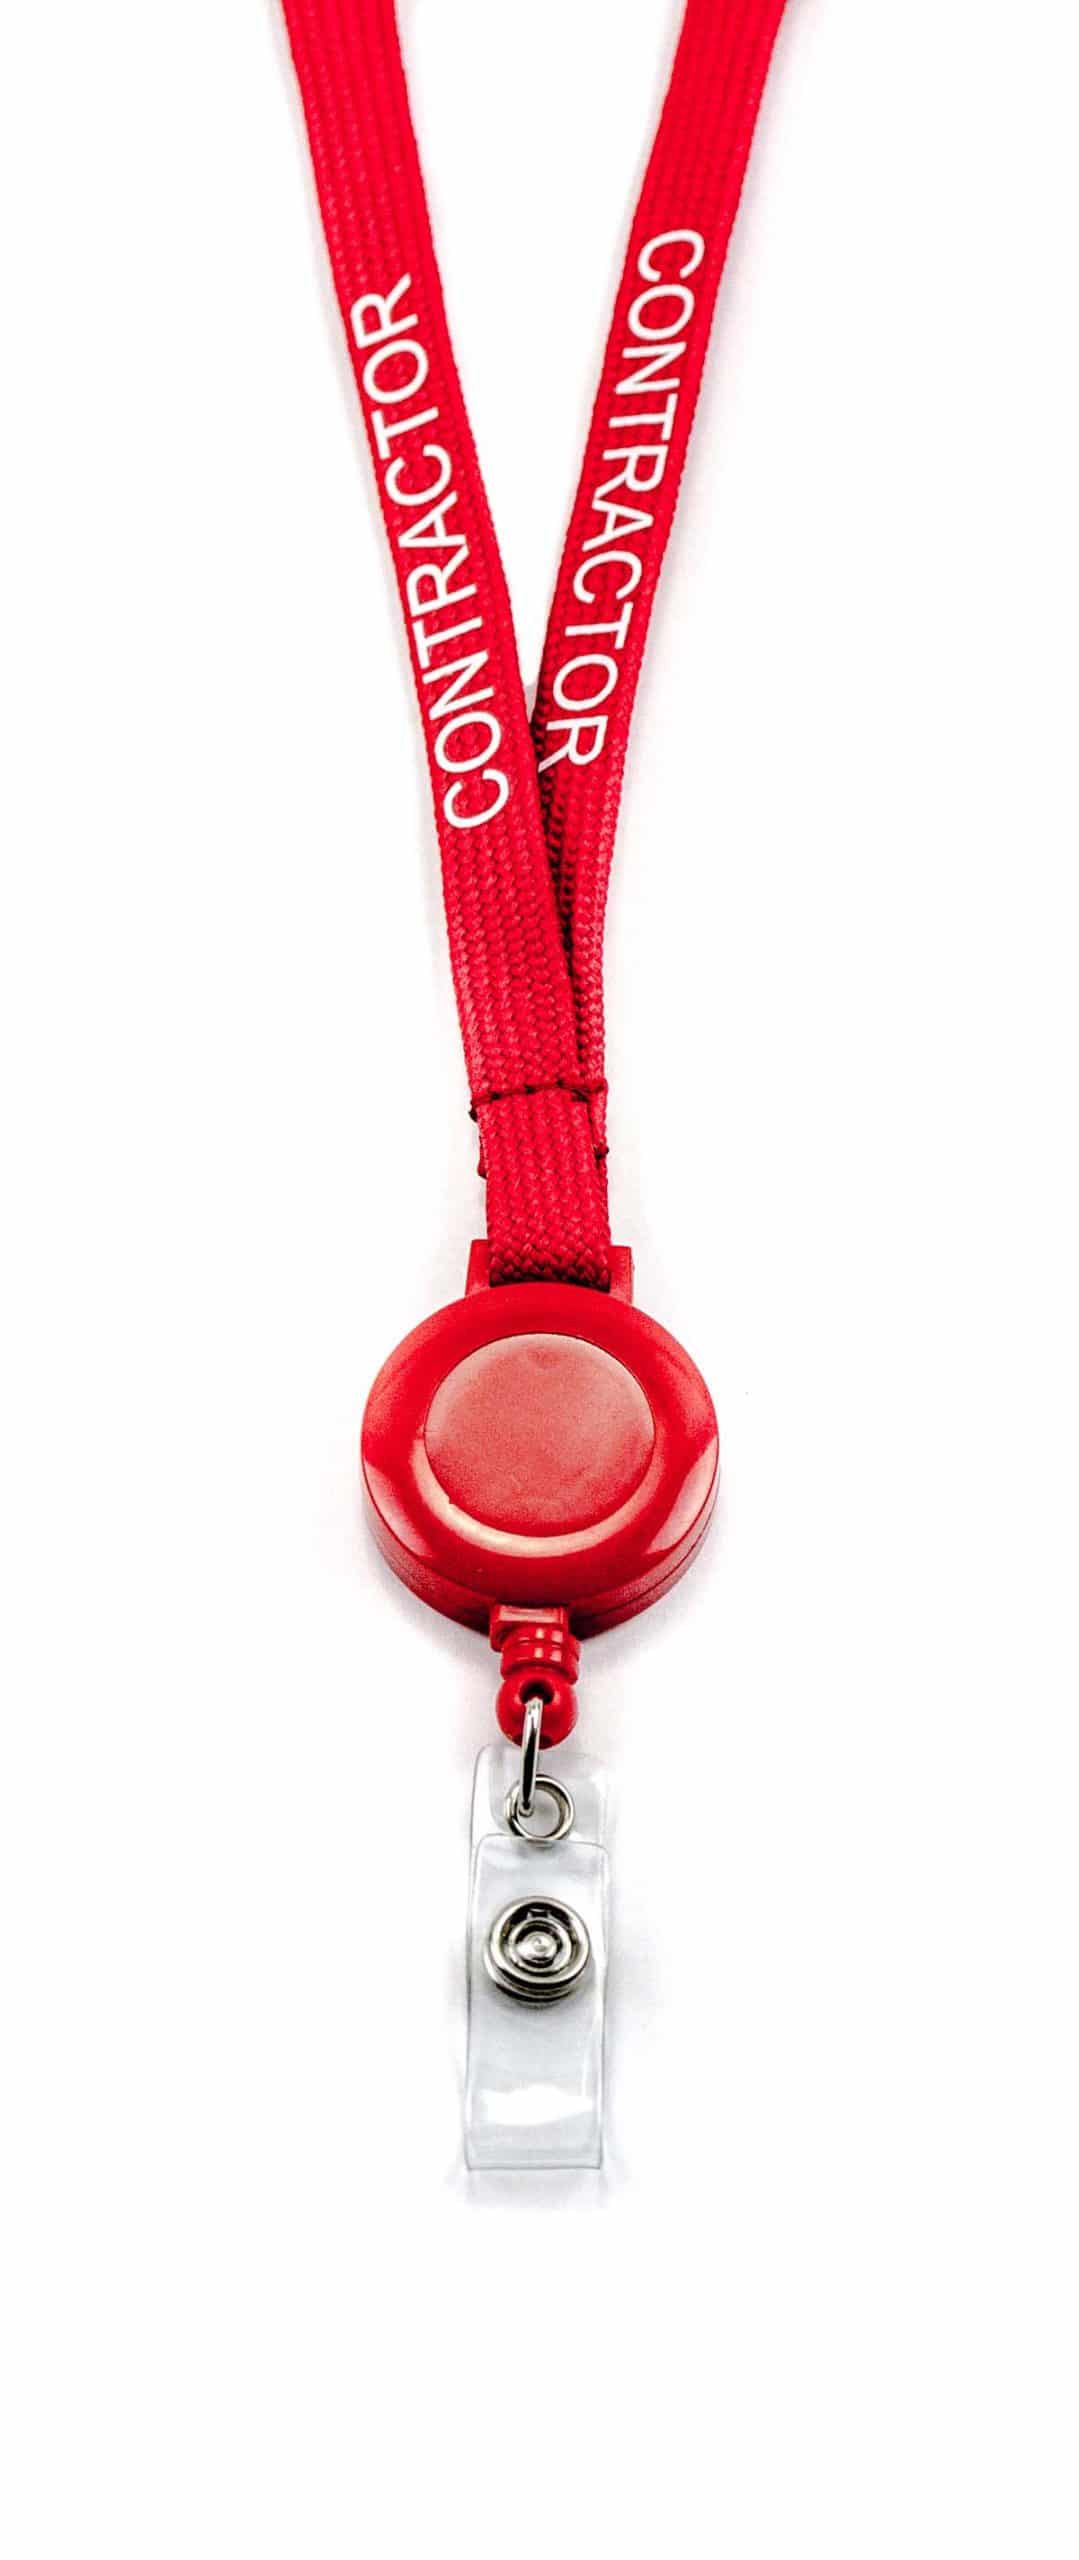 CONTRACTOR Economy Retractable Lanyard Lanyo in Red